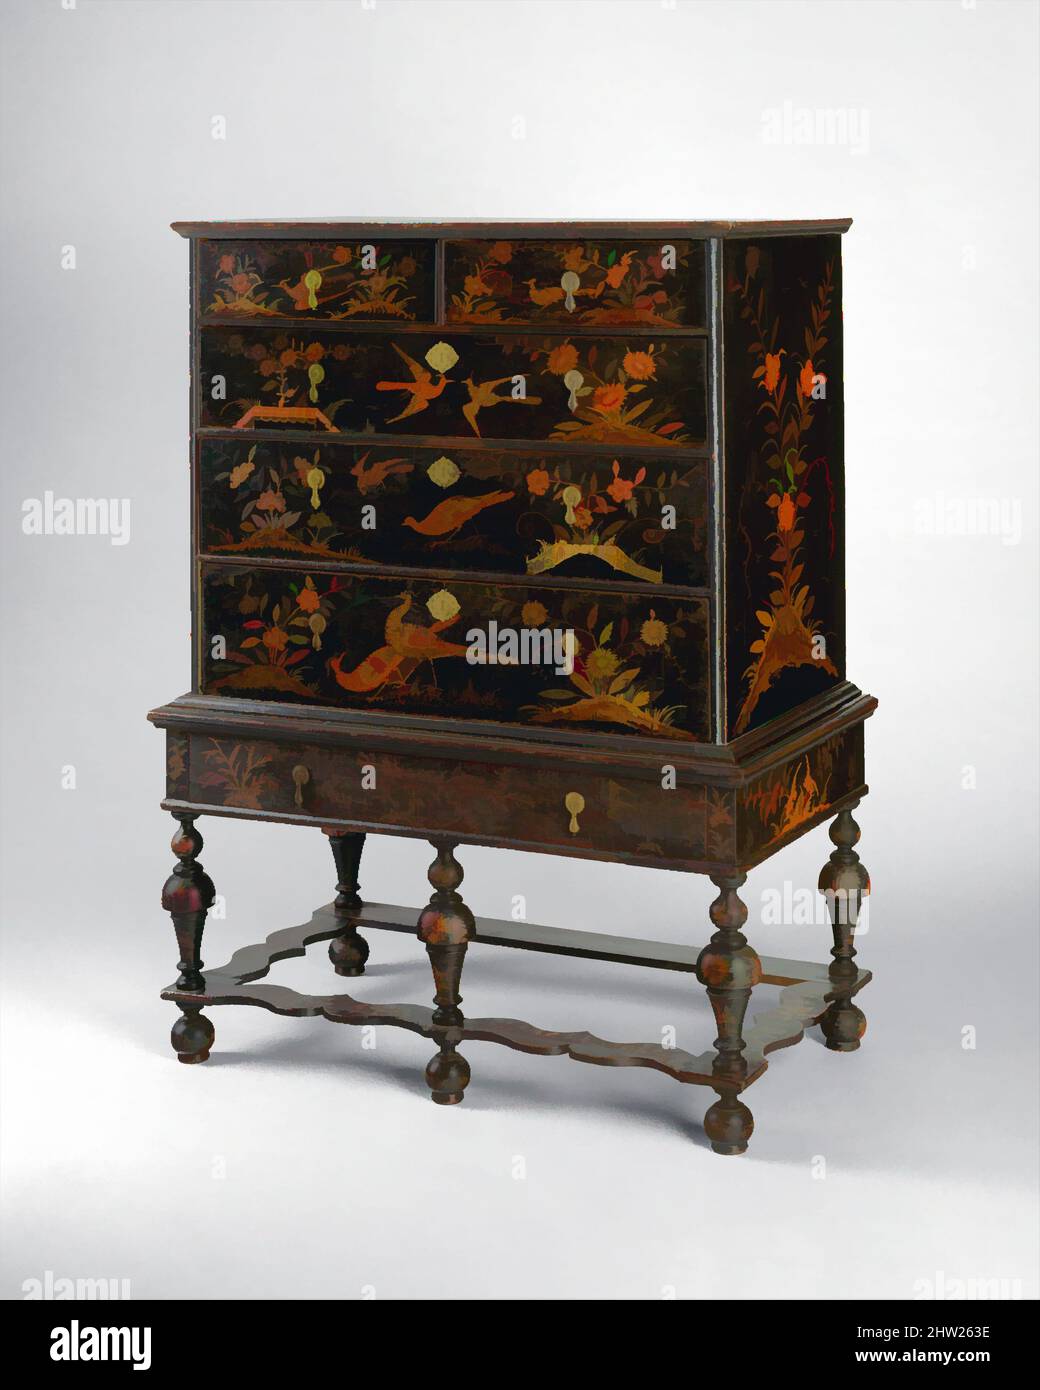 Art inspired by High chest of drawers, 1710–25, Probably made in Boston, Massachusetts, United States, American, Painted white pine, poplar, basswood, 52 x 39 1/2 x 21 3/4 in. (132.1 x 100.3 x 55.2 cm), Furniture, The decoration on this chest, with its oriental motifs and palette of, Classic works modernized by Artotop with a splash of modernity. Shapes, color and value, eye-catching visual impact on art. Emotions through freedom of artworks in a contemporary way. A timeless message pursuing a wildly creative new direction. Artists turning to the digital medium and creating the Artotop NFT Stock Photo